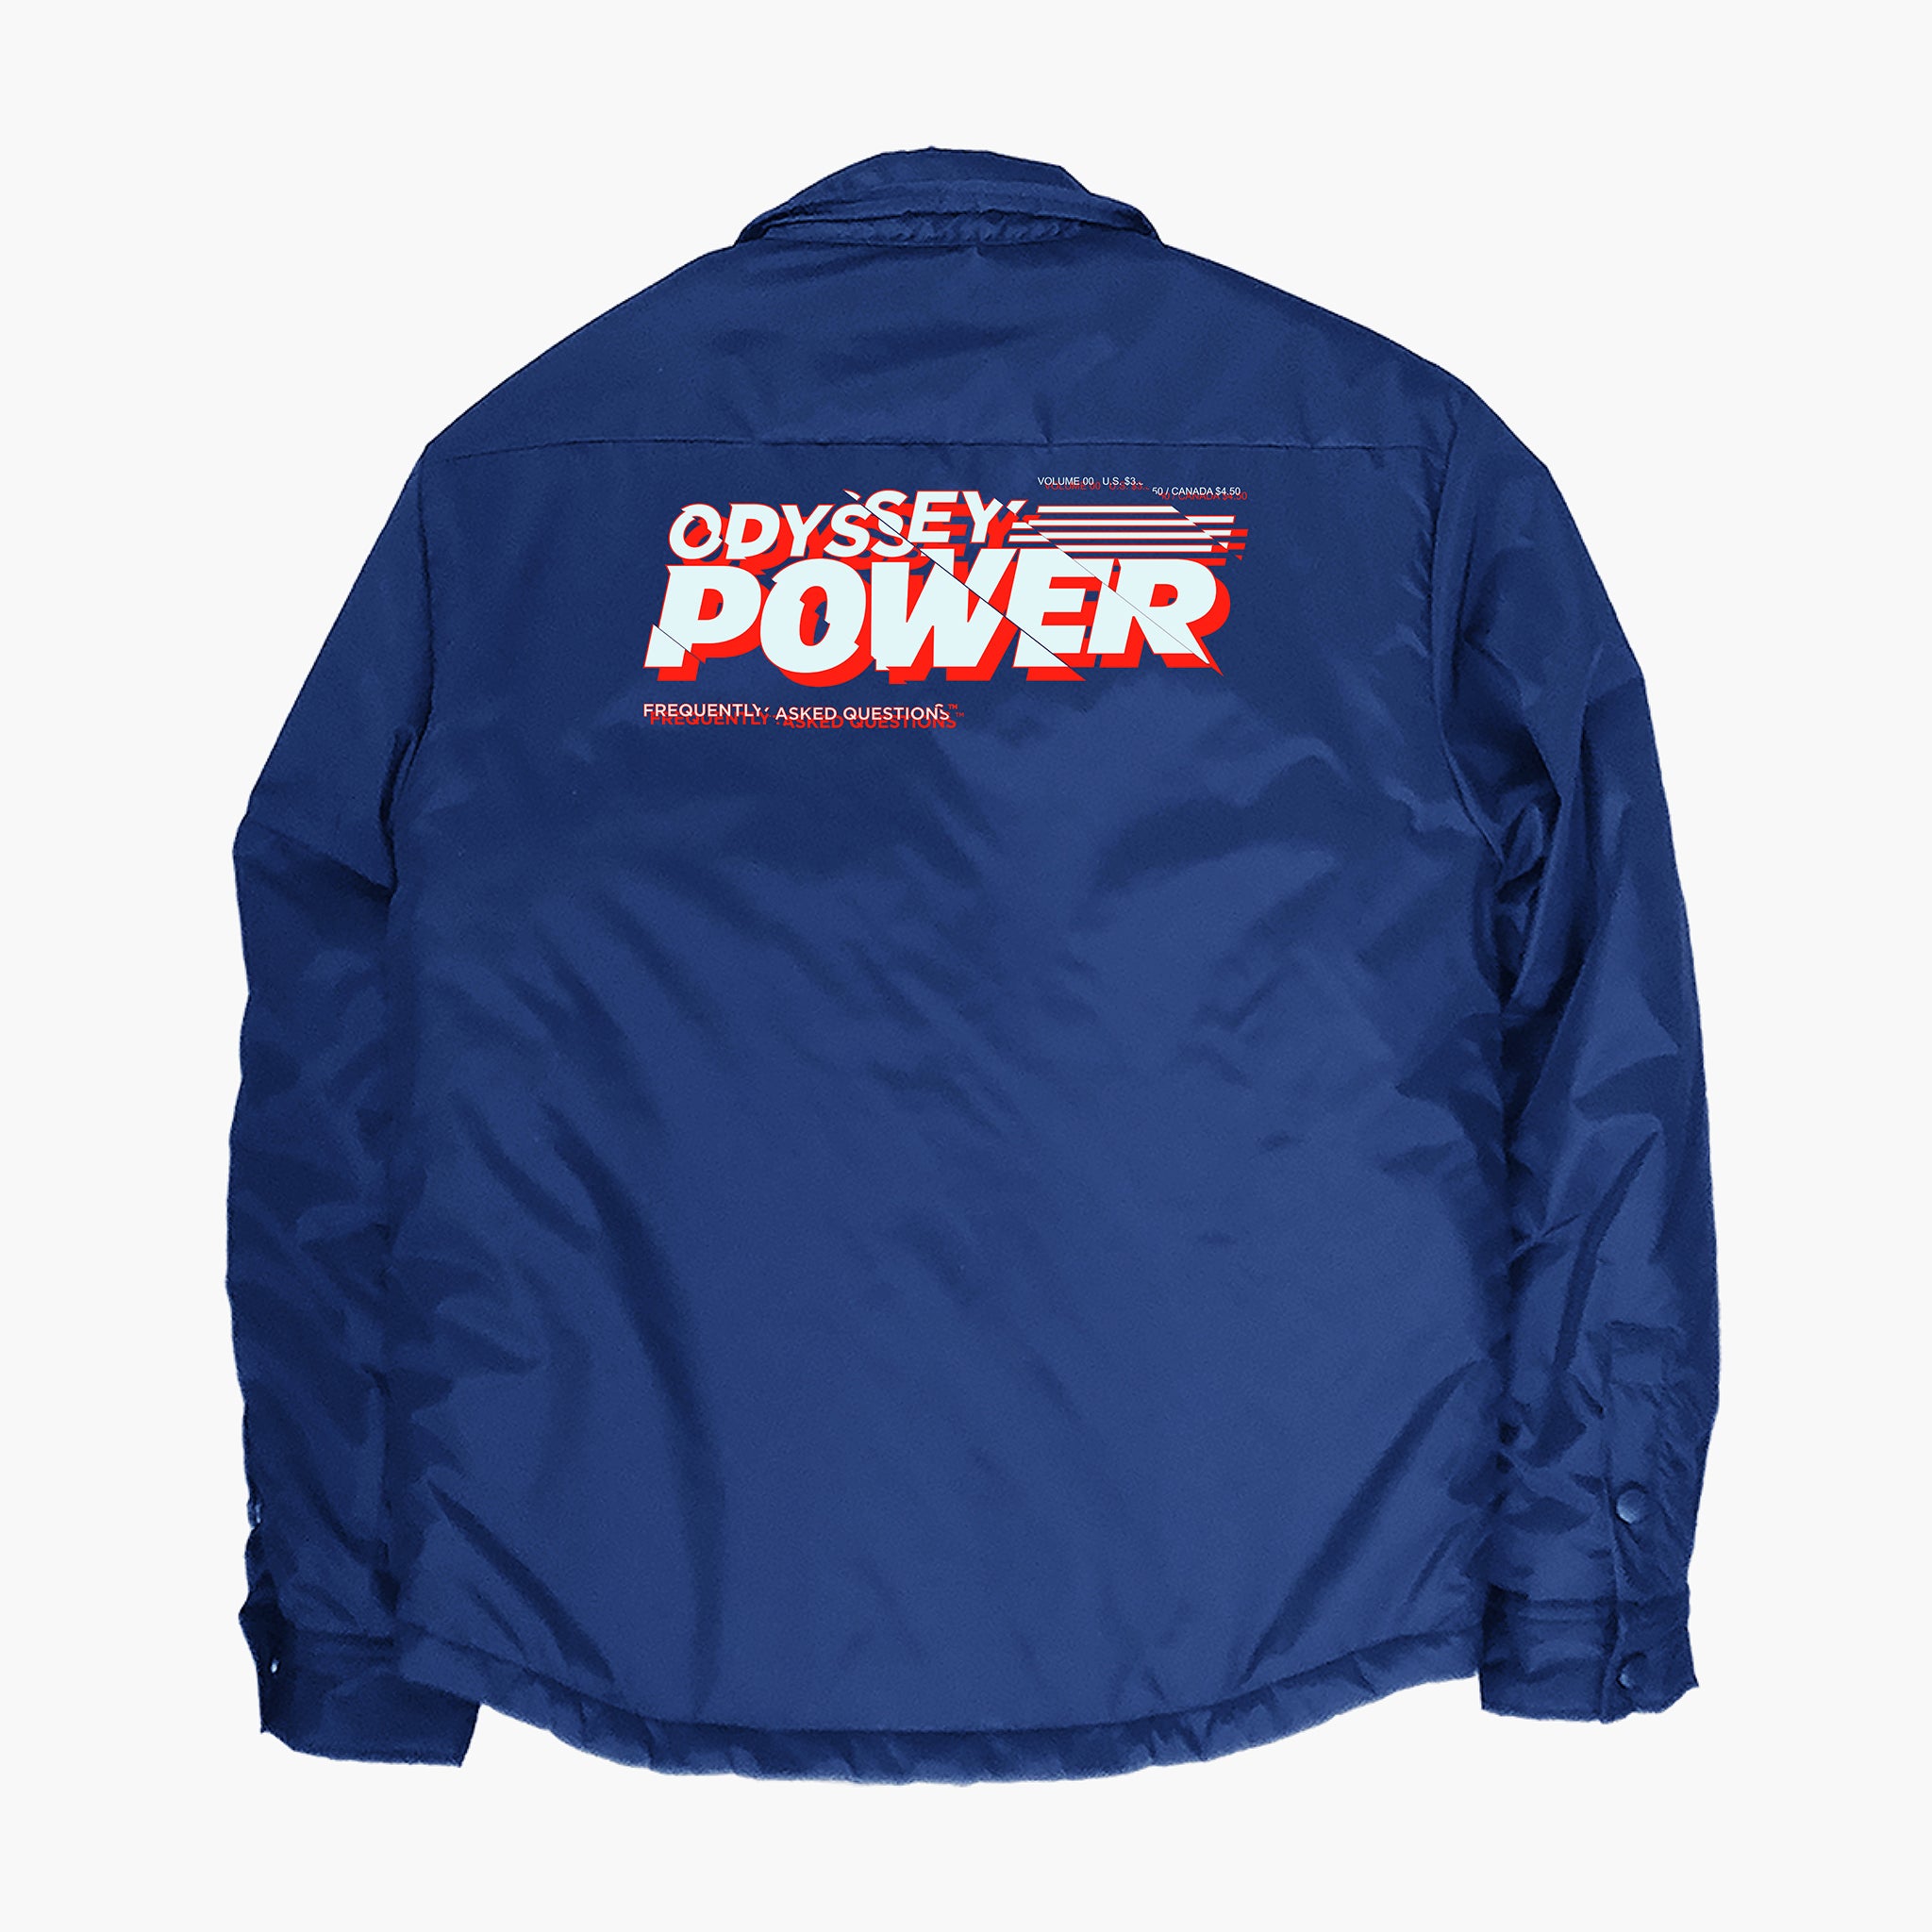 Odyssey Power Coach Jacket - Frequently Asked Questions